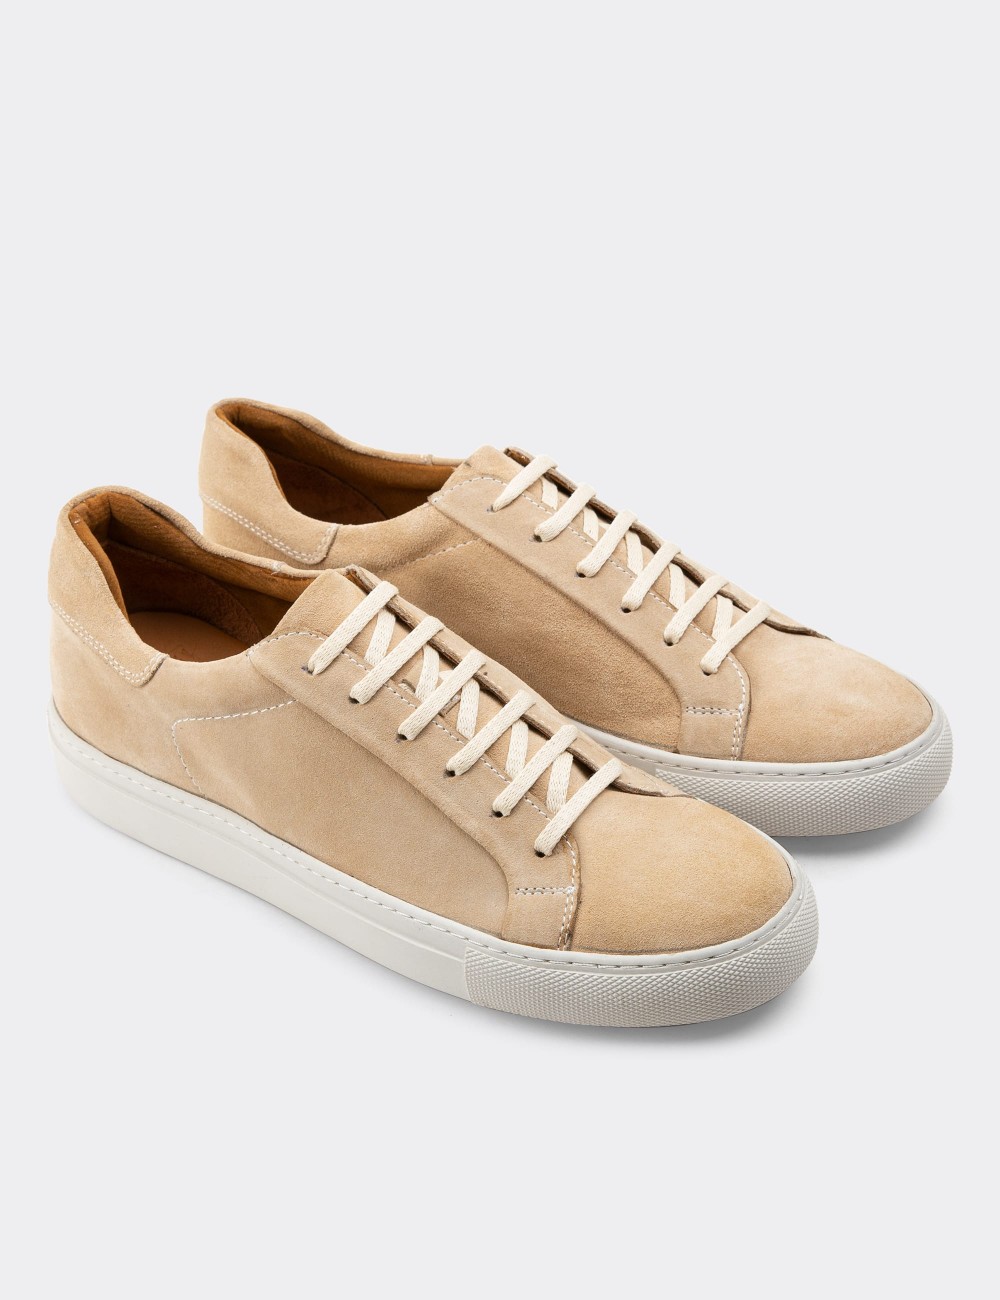 Beige Suede Leather Sneakers - 01829MBEJC03